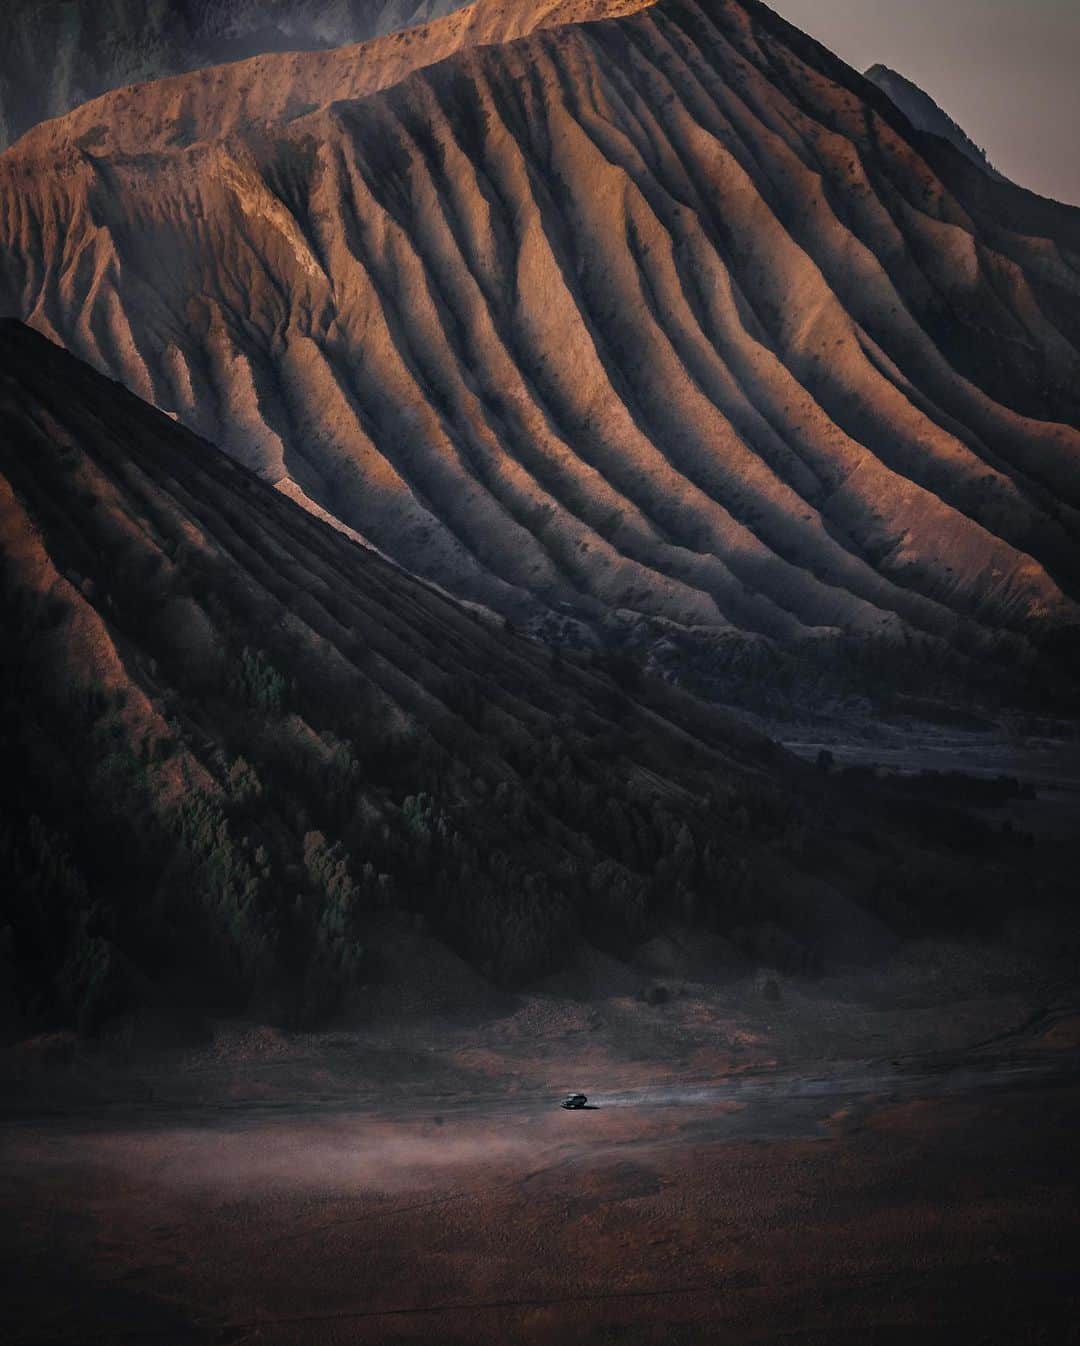 R̸K̸のインスタグラム：「I stayed in Malang, Indonesia and visited a place called Bromo Mountain in eastern Java. We left in the middle of the night and spent several hours driving off-road in the jeep of our guide from the hotel where we were staying. The mountains appeared at dawn and were a spectacular sight. It had been a long time since the end of the pandemic, so it was a lot of fun to go on a photo trip like this. I may upload some of the filming on YouTube at a later date. Thanks for your guide to Bromo Mountain @vinnybromosunrise  ・ ・ ・ ・ #beautifuldestinations #earthfocus #earthbestshots #earthoffcial #earthpix #thegreatplanet #discoverearth #roamtheplanet #ourplanetdaily #nature #tentree #livingonearth  #theglobewanderer #awesome_photographers #wonderful_places #TLPics #designboom #voyaged #sonyalpha #bealpha #travellingthroughtheworld #cnntravel #luxuryworldtraveler #fromwhereidrone #onlyforluxury  #bbctravel #lovetheworld @sonyalpha  @lightroom @soul.planet @earthfever @9gag @paradise @natgeotravel @awesome.earth @national_archaeology」